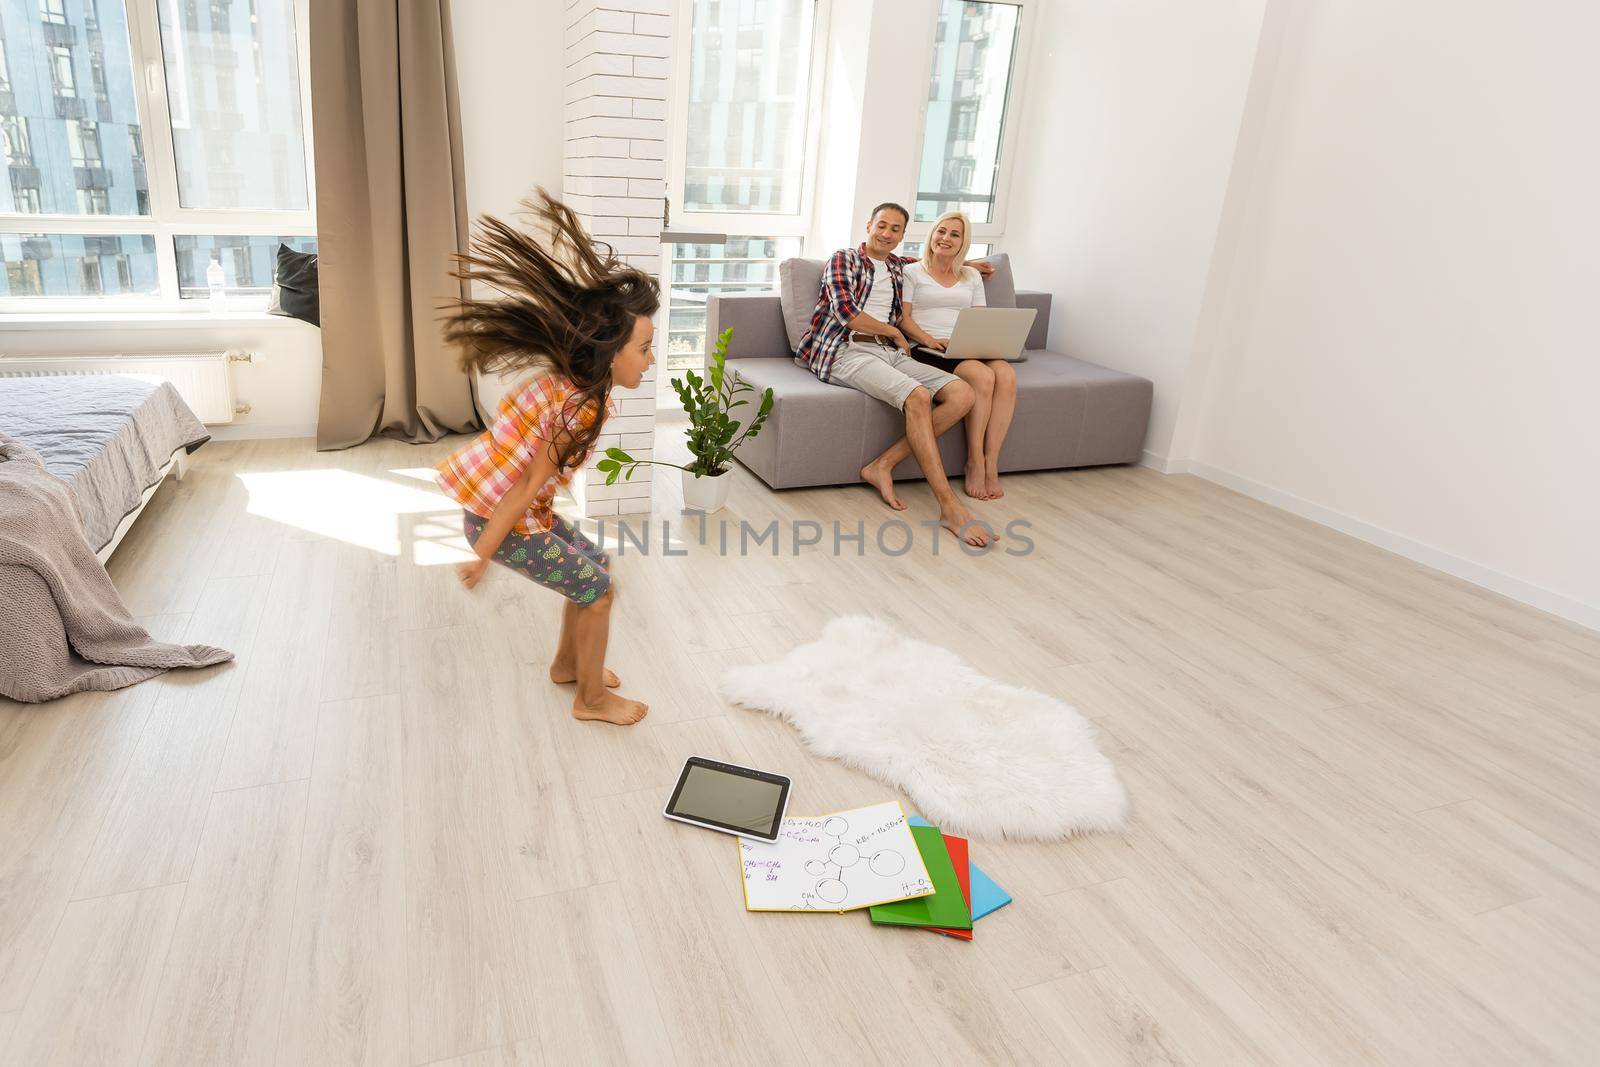 8 years old girl jumping in a child room at home, still life photo by Andelov13